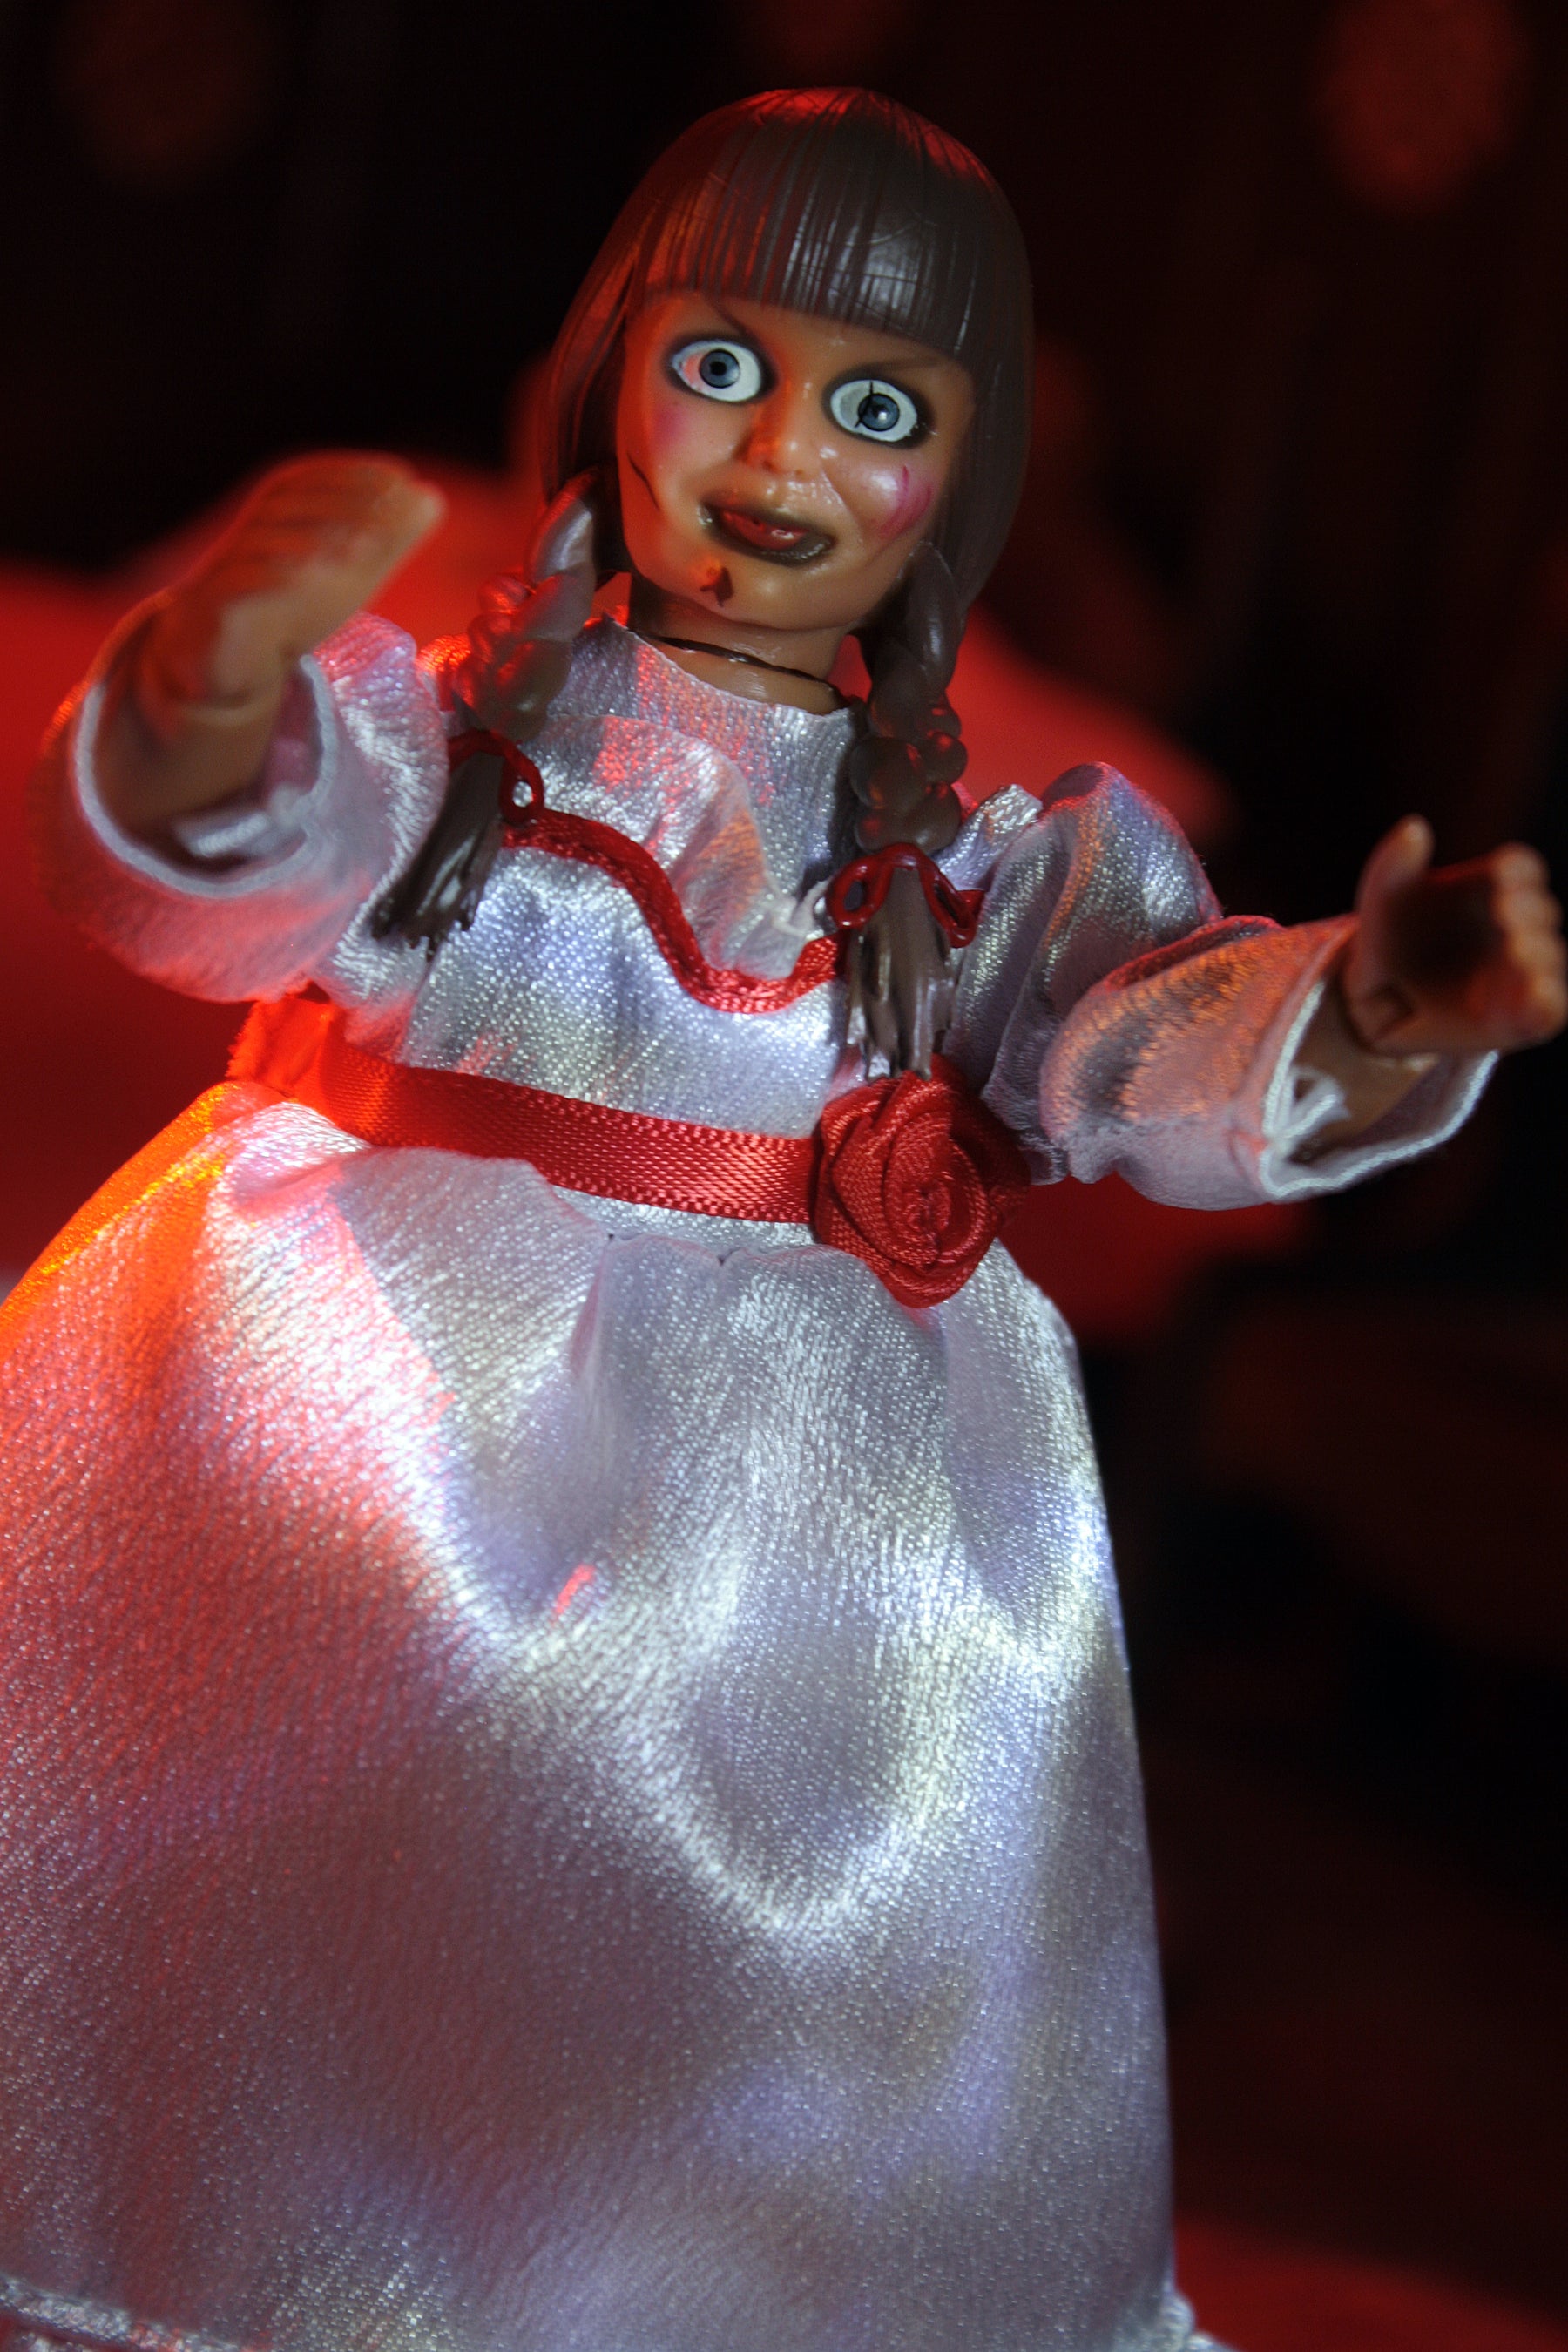 Mego Horror Wave 18 - The Conjuring Universe - Annabelle Comes Home 8" Action Figure